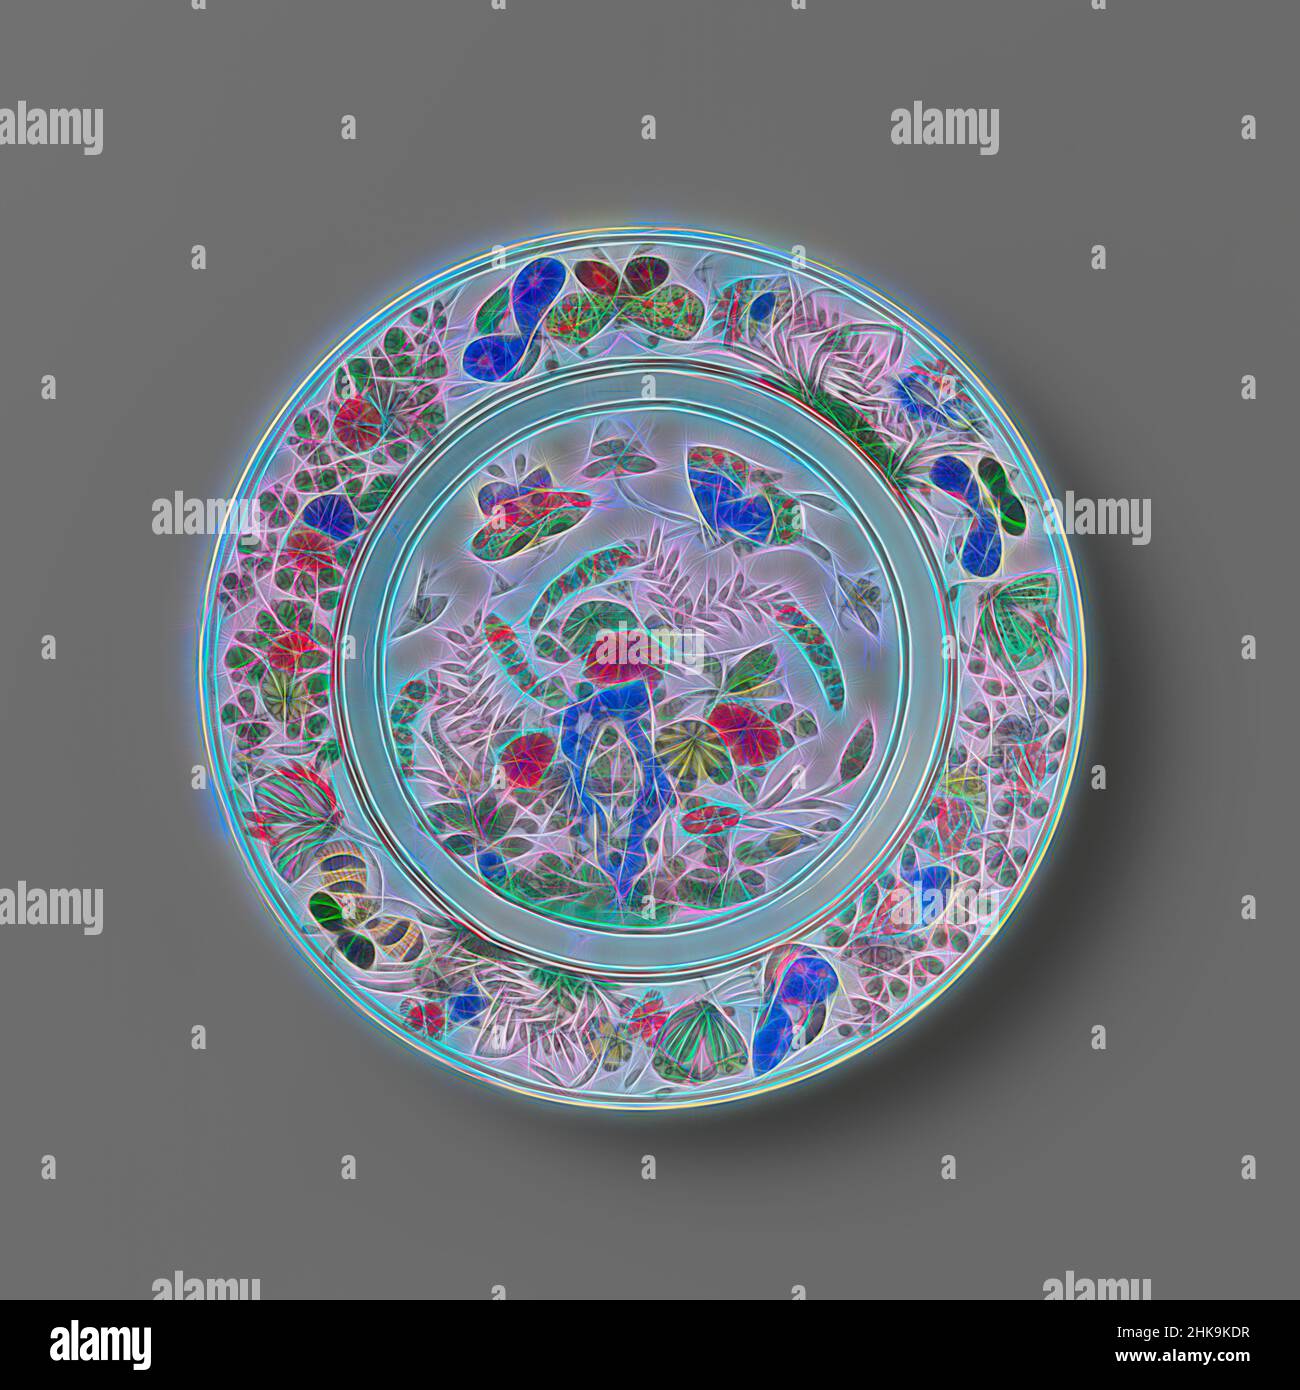 Inspired by Plate with rock, butterflies and flowering plants, Plate of porcelain, painted in underglaze blue and on the glaze blue, red, green, yellow, eggplant and black. On the flat, butterflies and flowering plants near a rock; the rim with four flower groups (chrysanthemum, peony, aster, Reimagined by Artotop. Classic art reinvented with a modern twist. Design of warm cheerful glowing of brightness and light ray radiance. Photography inspired by surrealism and futurism, embracing dynamic energy of modern technology, movement, speed and revolutionize culture Stock Photo